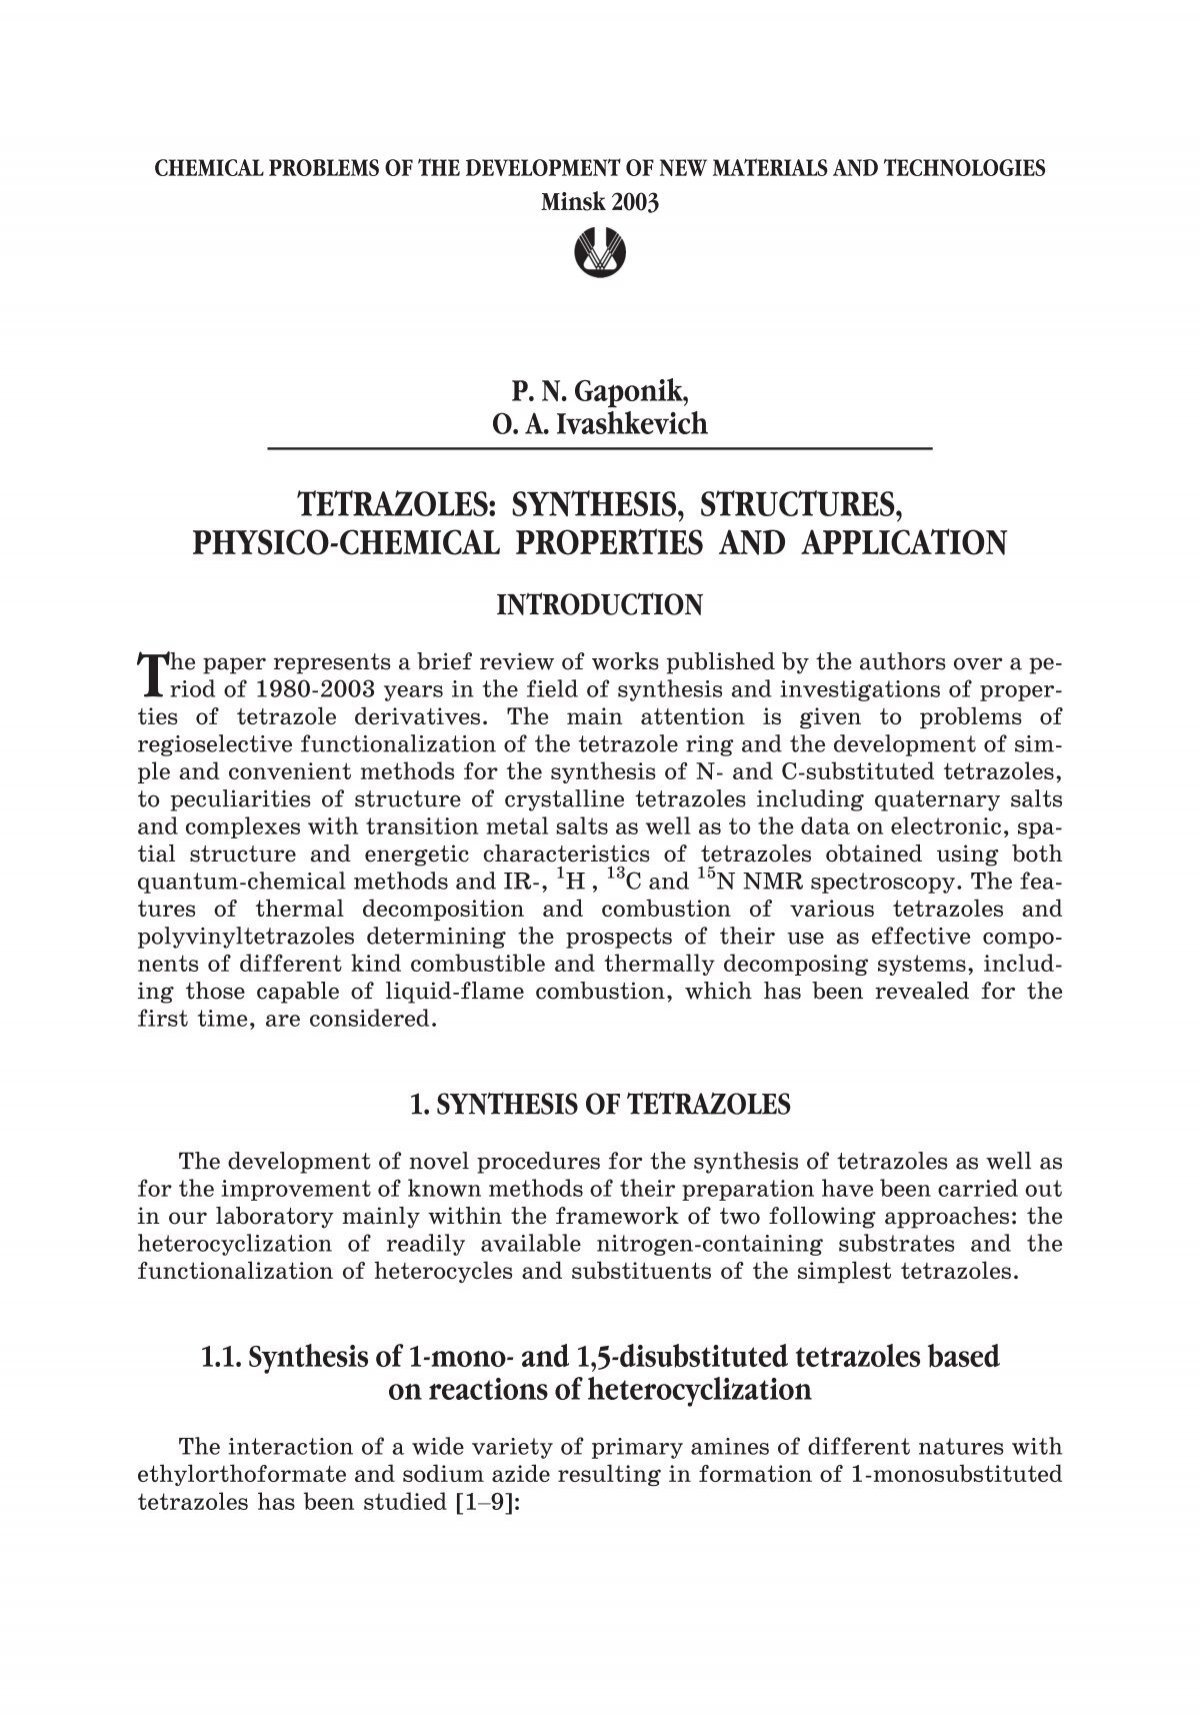 Tetrazoles Synthesis Structures Physico Chemical